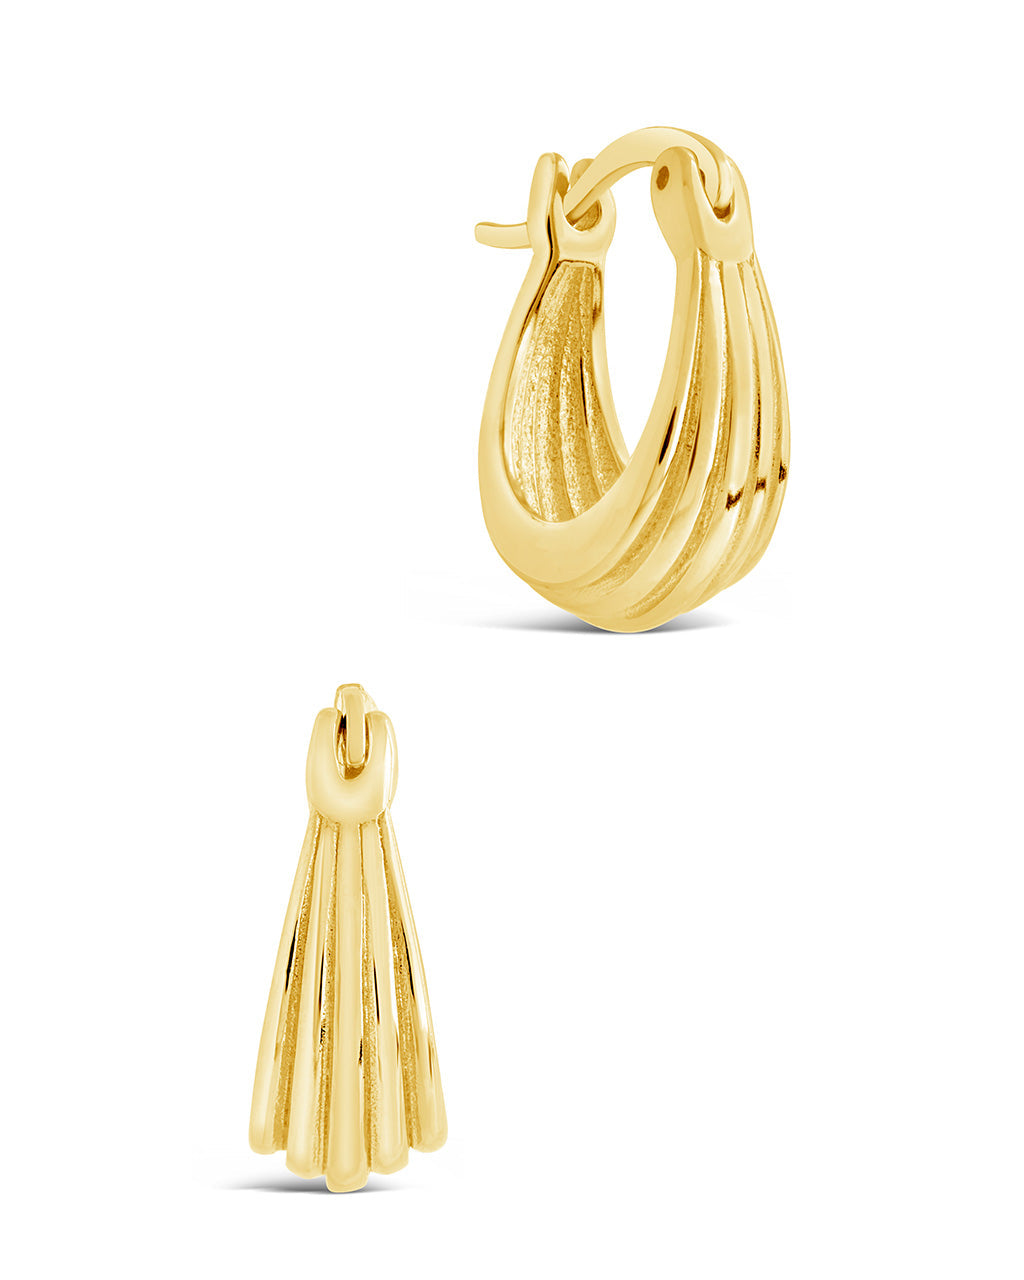 Sterling Silver Ripple Statement Hoops Earring Sterling Forever Gold 